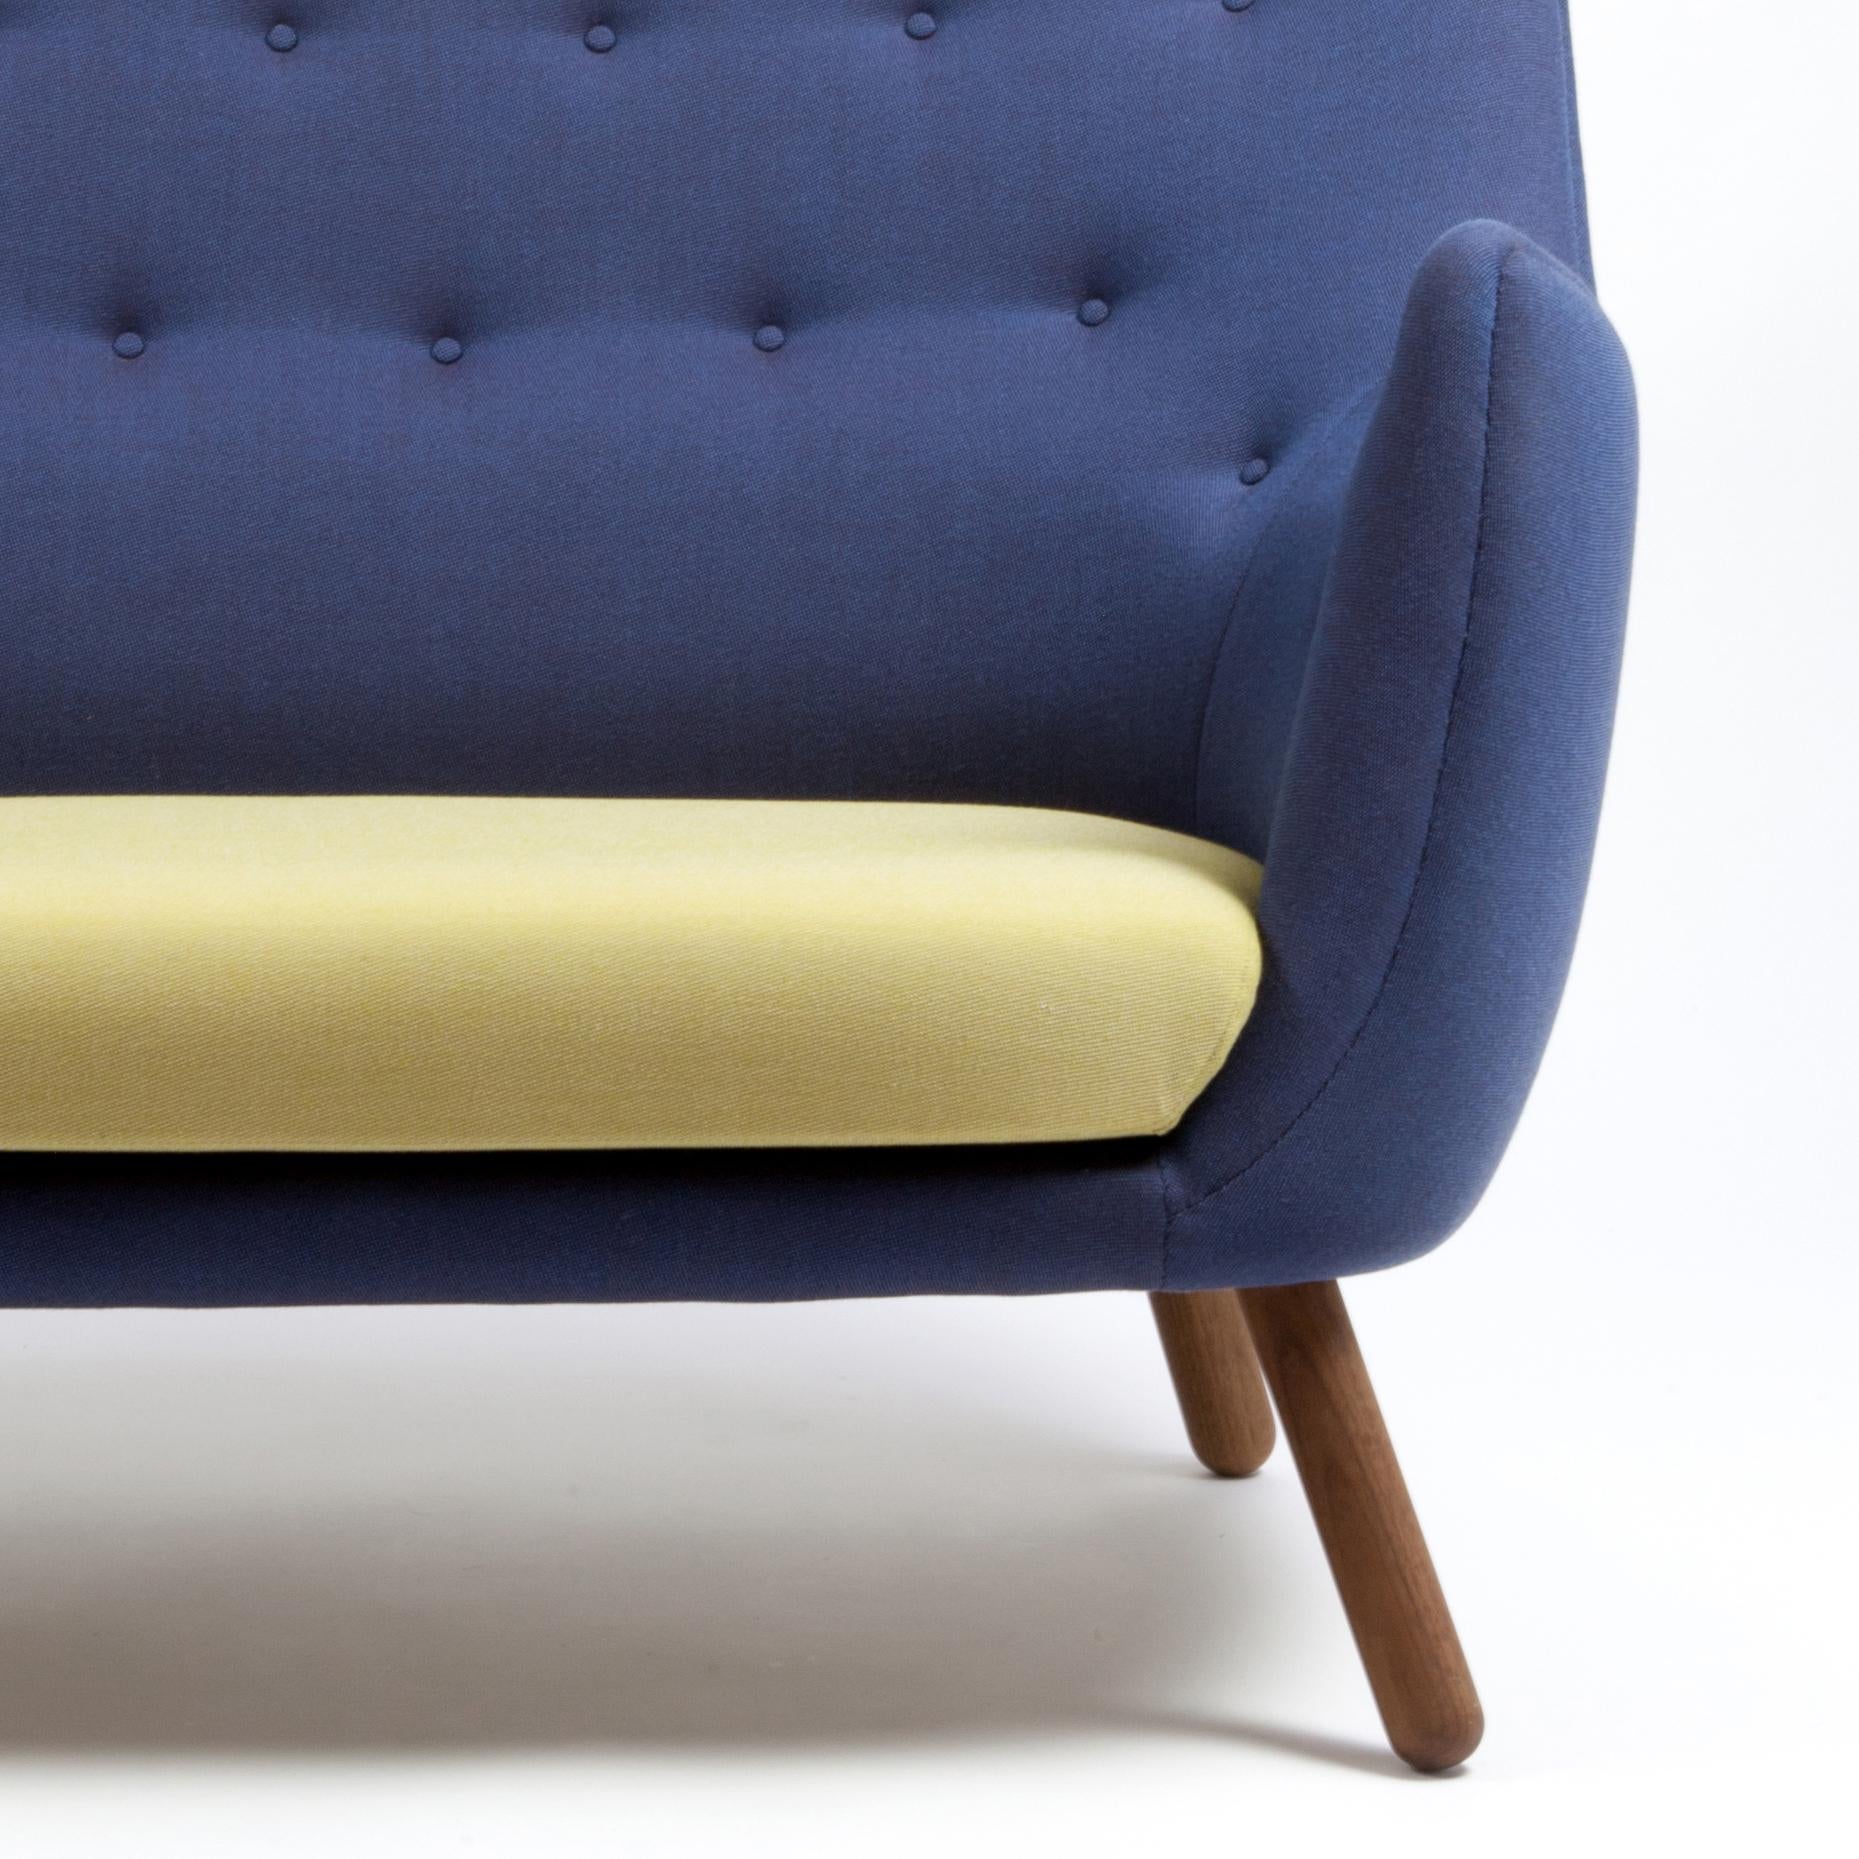 Sofa designed by Finn Juhl in 1946, relaunched in 2008.
Manufactured by House of Finn Juhl in Denmark.

This small two-seater sofa first saw the light of day at the Copenhagen Cabinetmakers’ Guild Exhibition in 1941. It should be seen as a